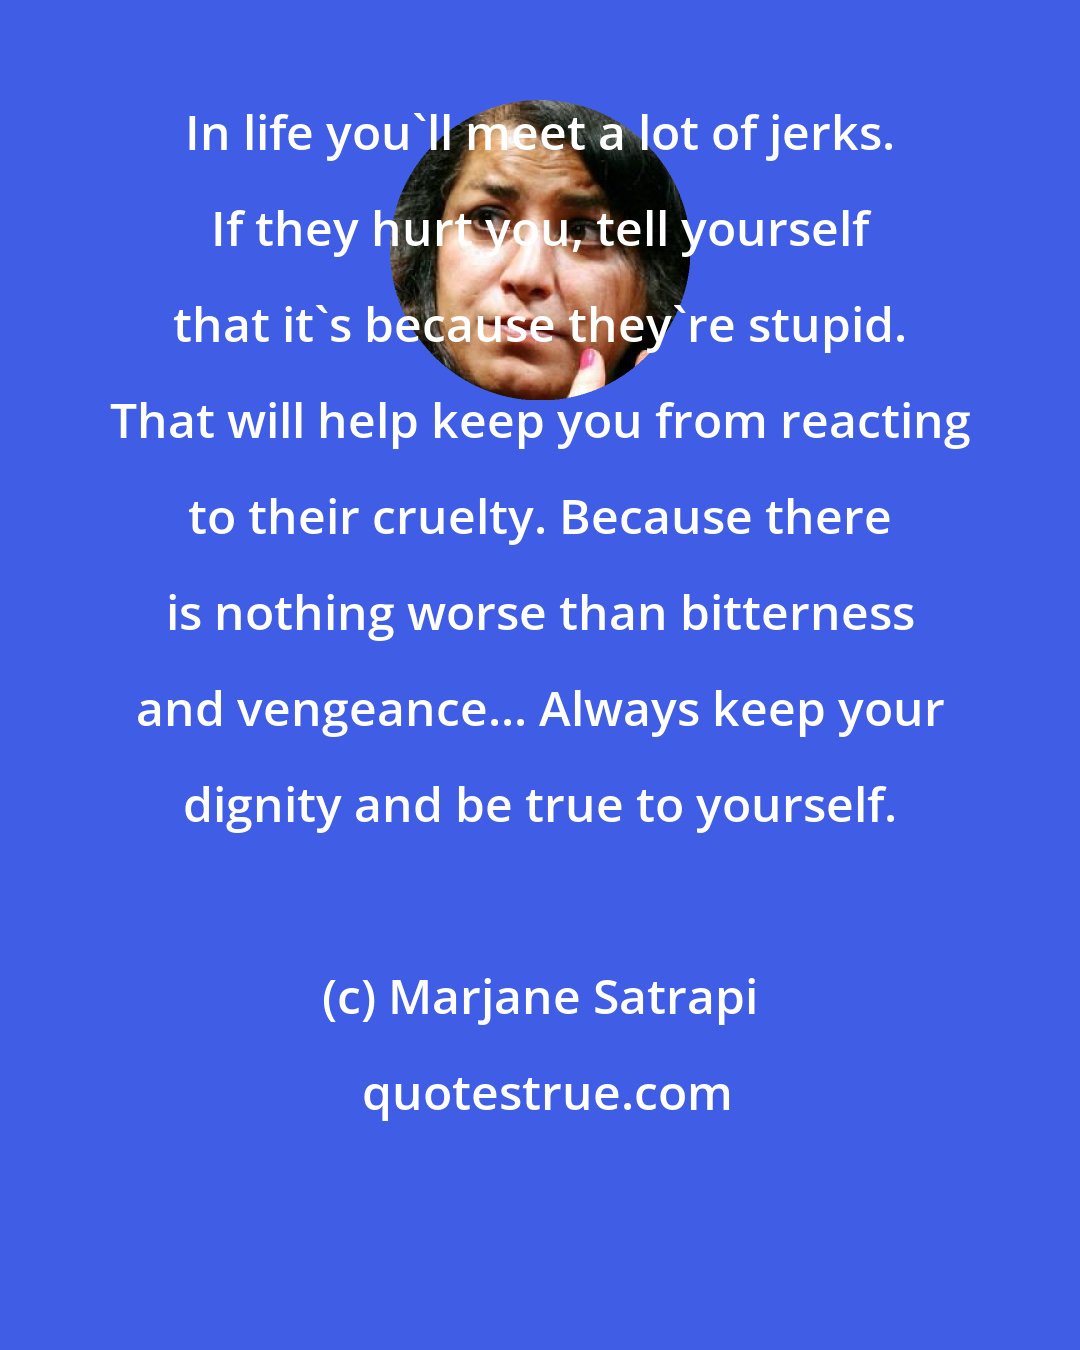 Marjane Satrapi: In life you'll meet a lot of jerks. If they hurt you, tell yourself that it's because they're stupid. That will help keep you from reacting to their cruelty. Because there is nothing worse than bitterness and vengeance... Always keep your dignity and be true to yourself.